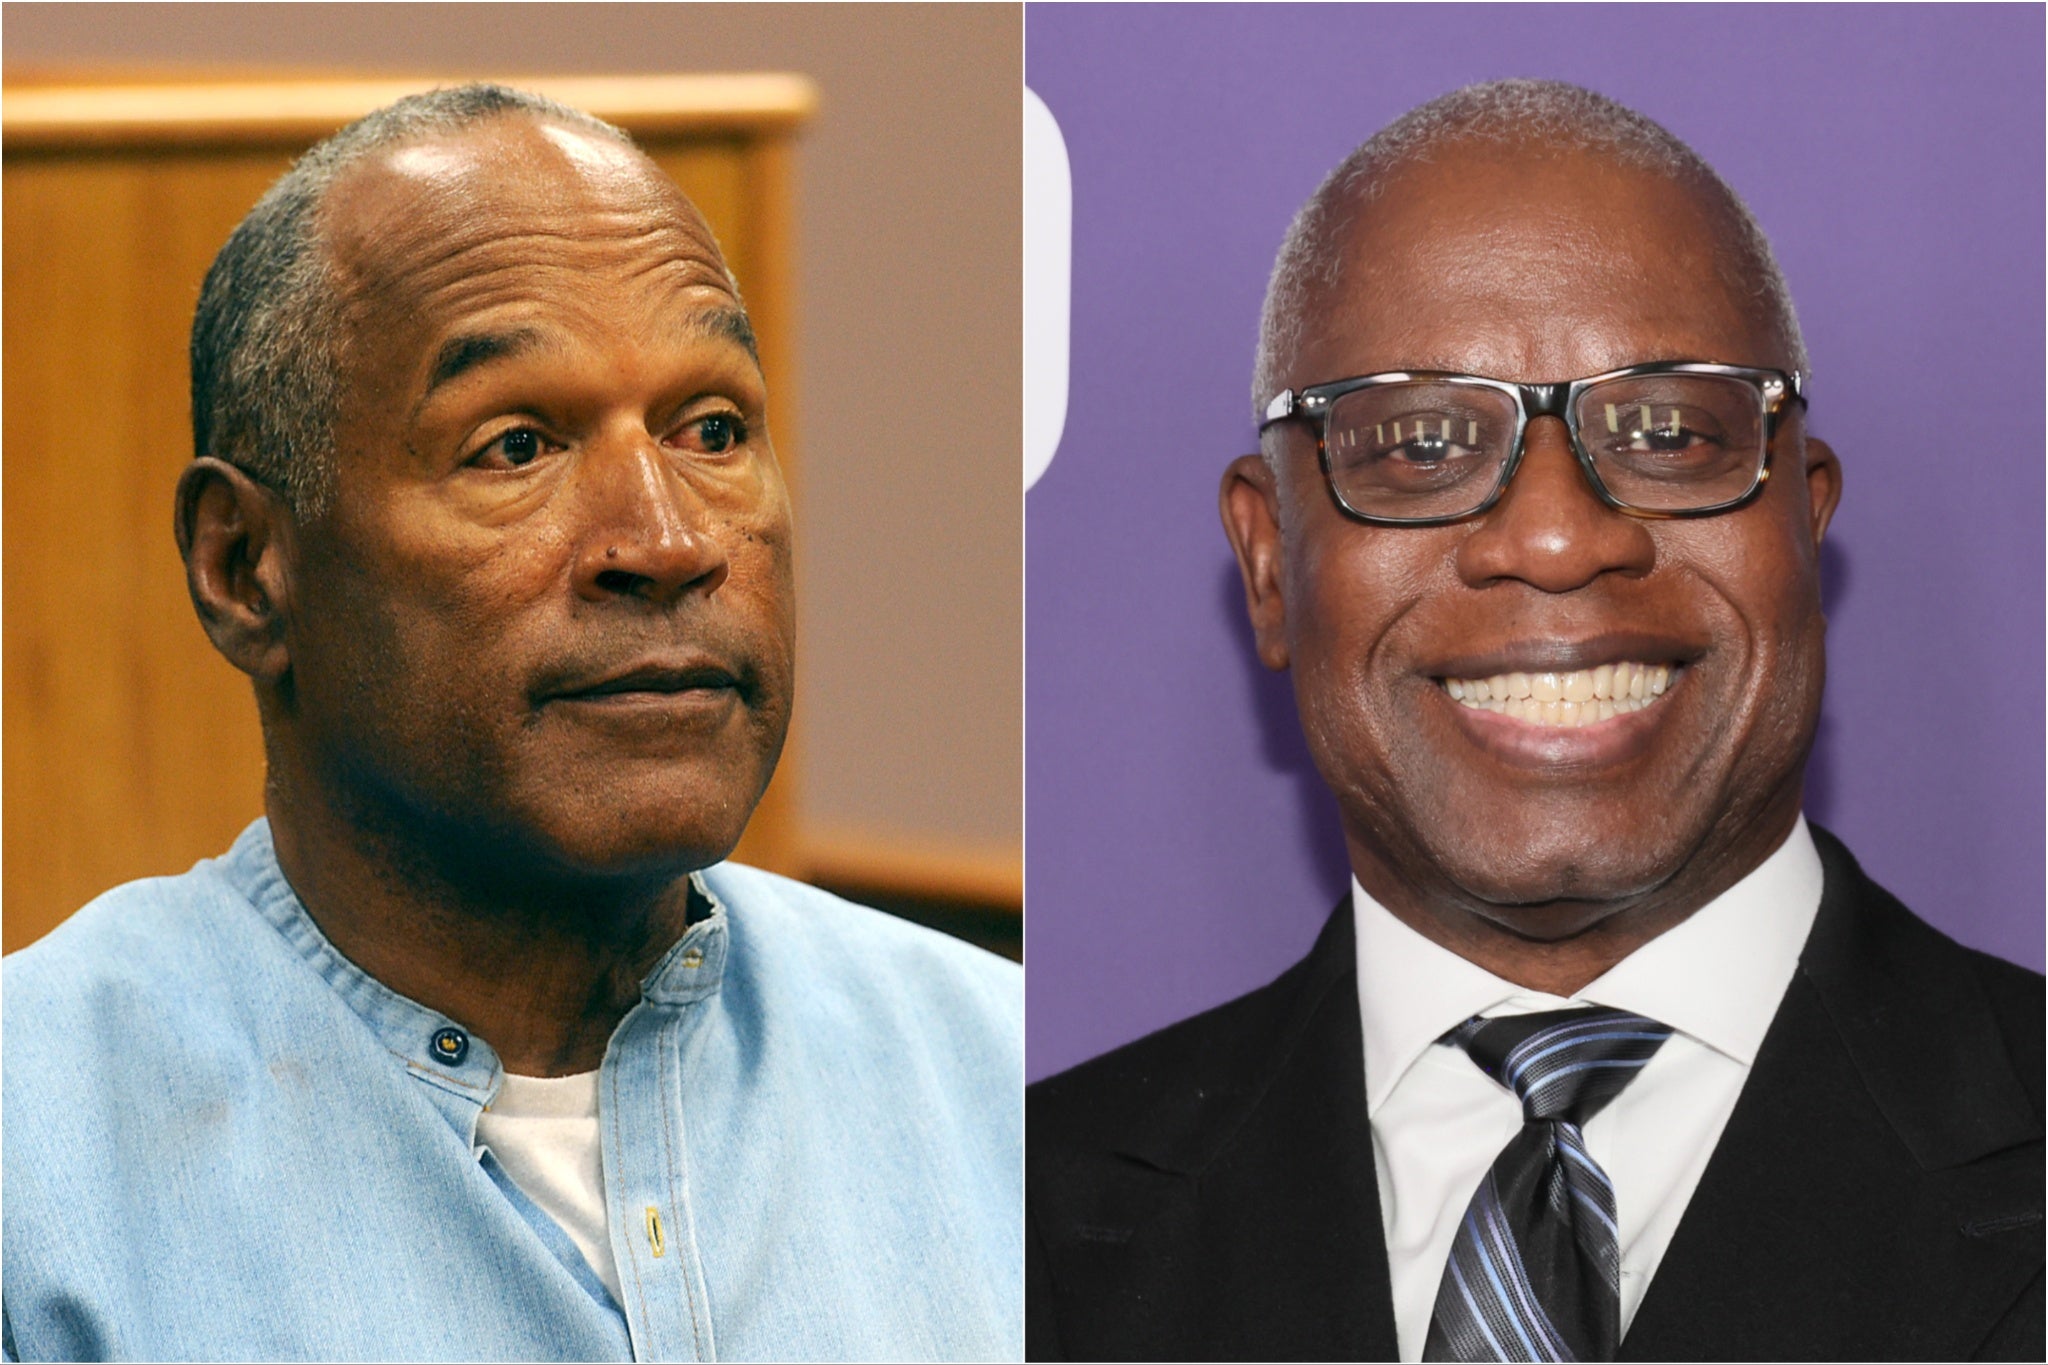 bet awards, oj simpson, taraji p henson, bet awards viewers outraged as oj simpson honoured in memoriam but andre braugher snubbed